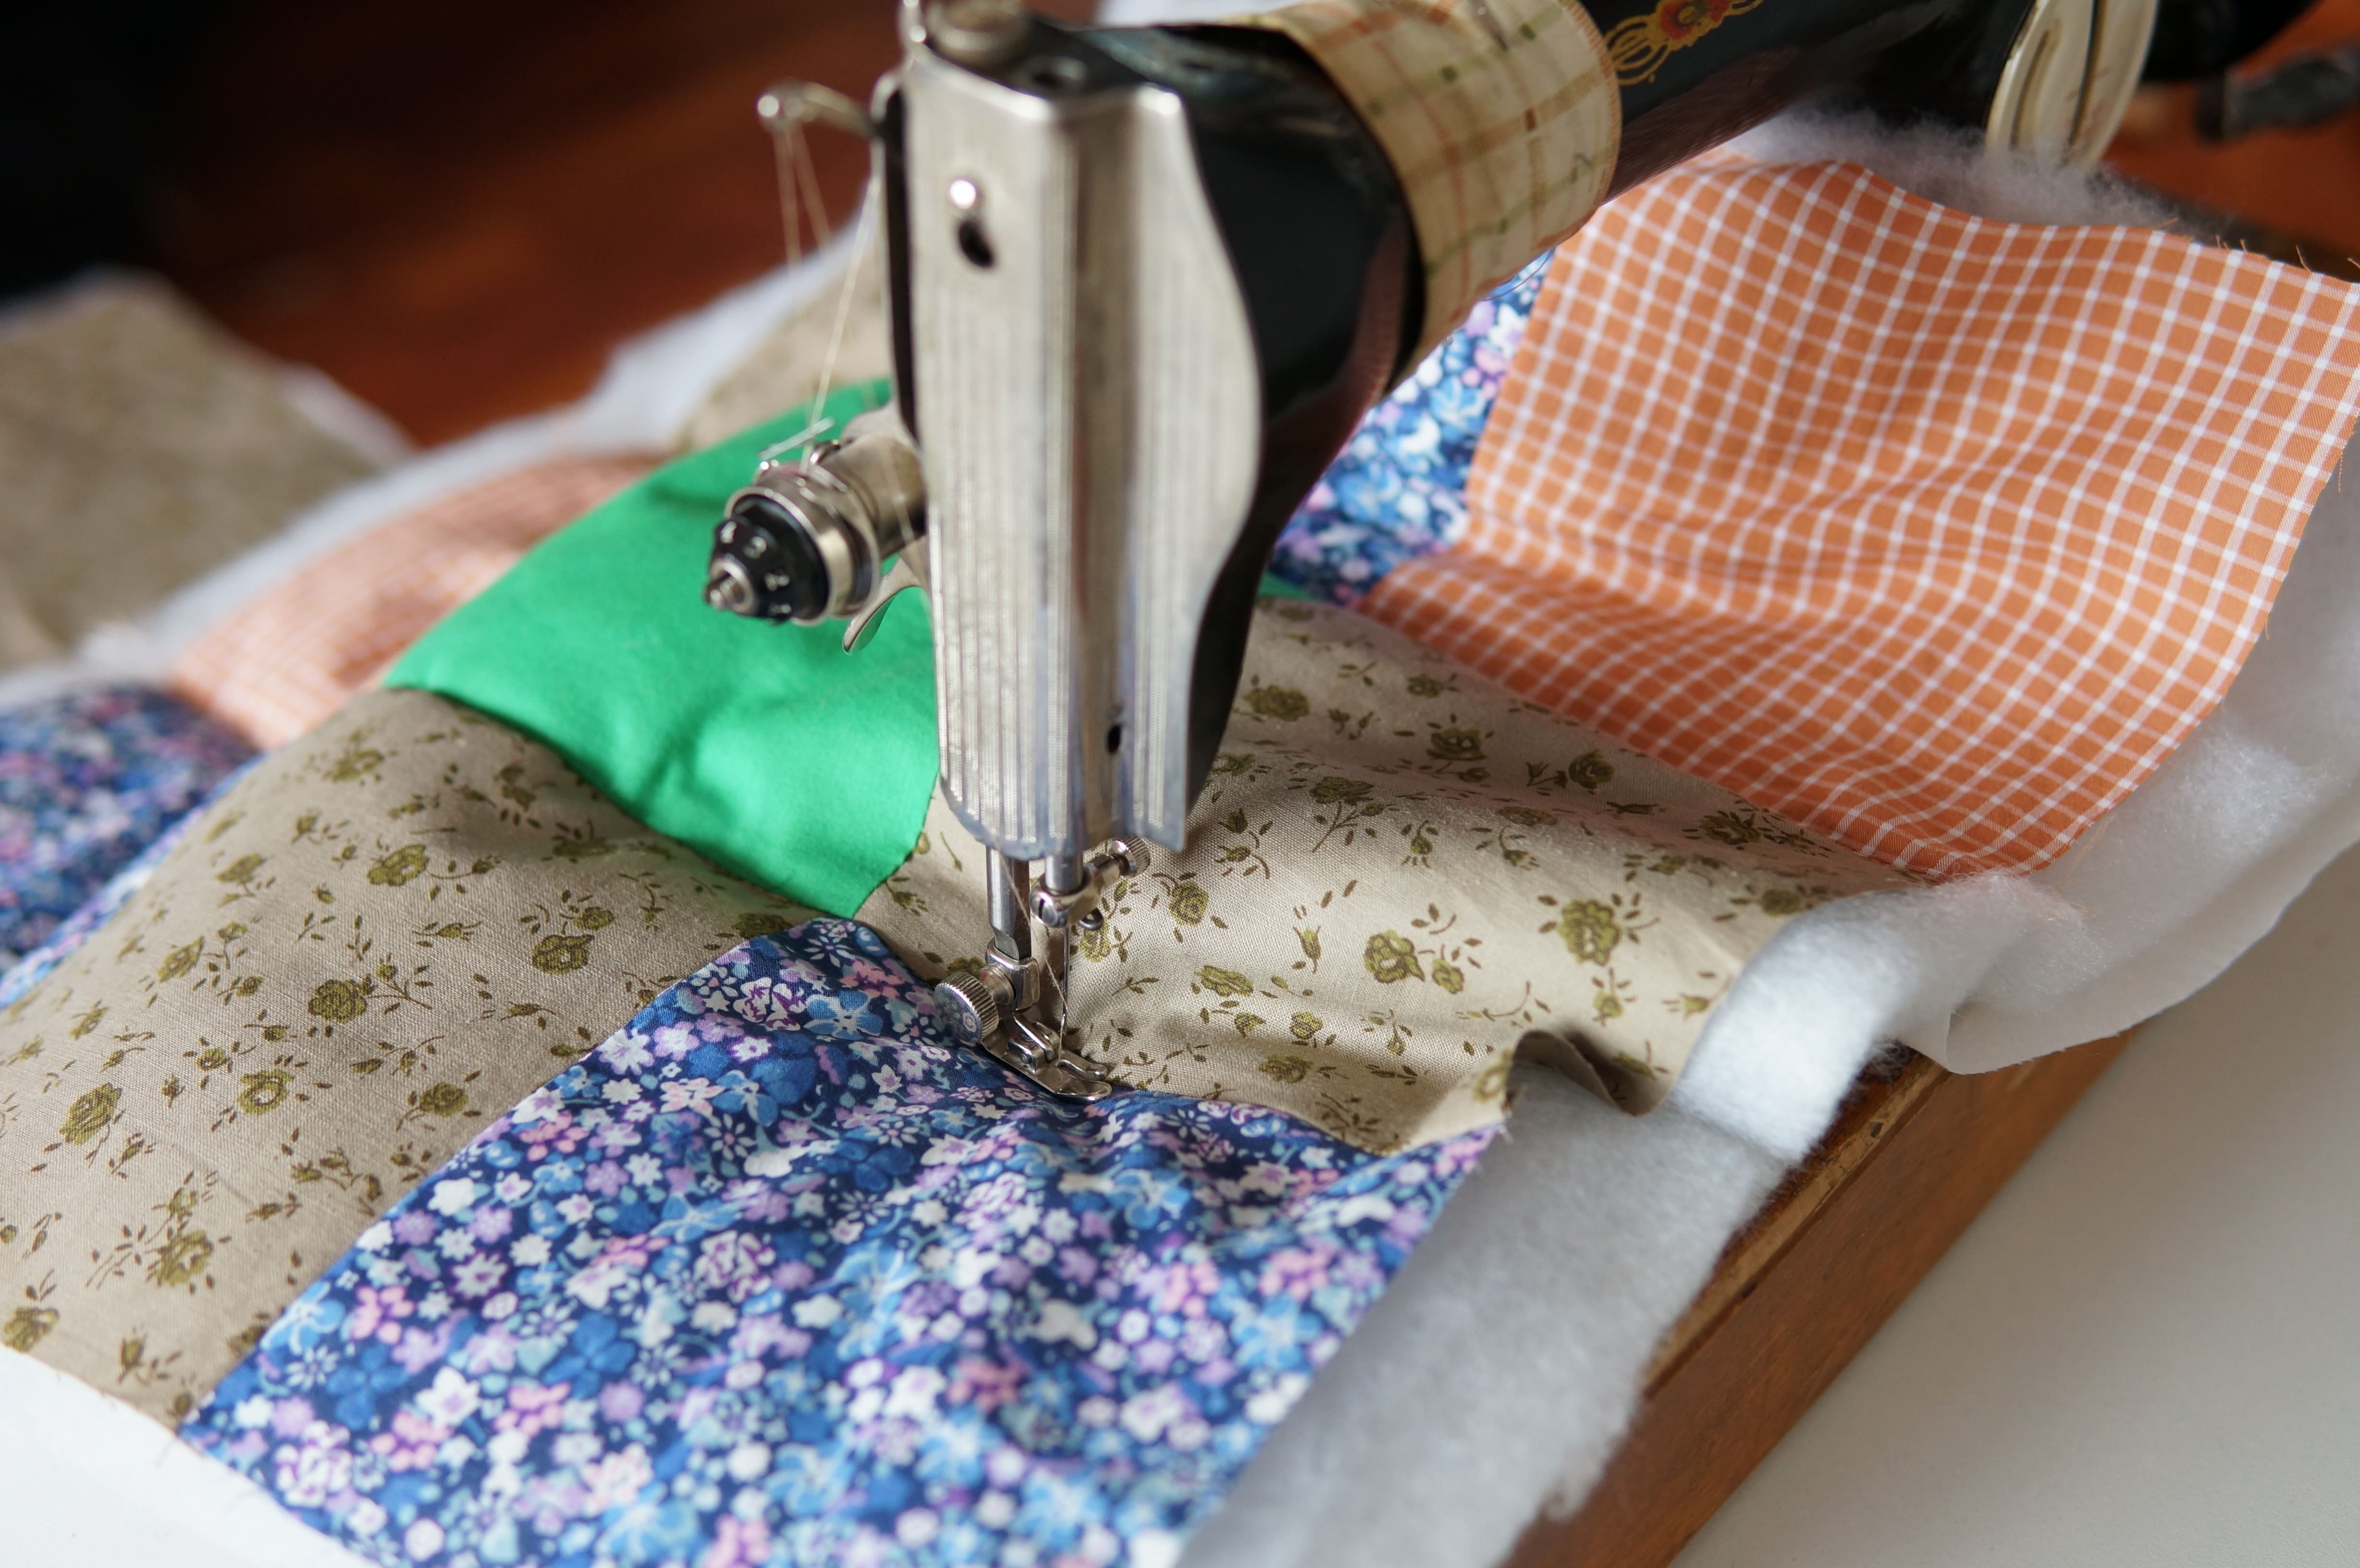 A colourful patchwork quilt being made on an old-fashioned sewing machine